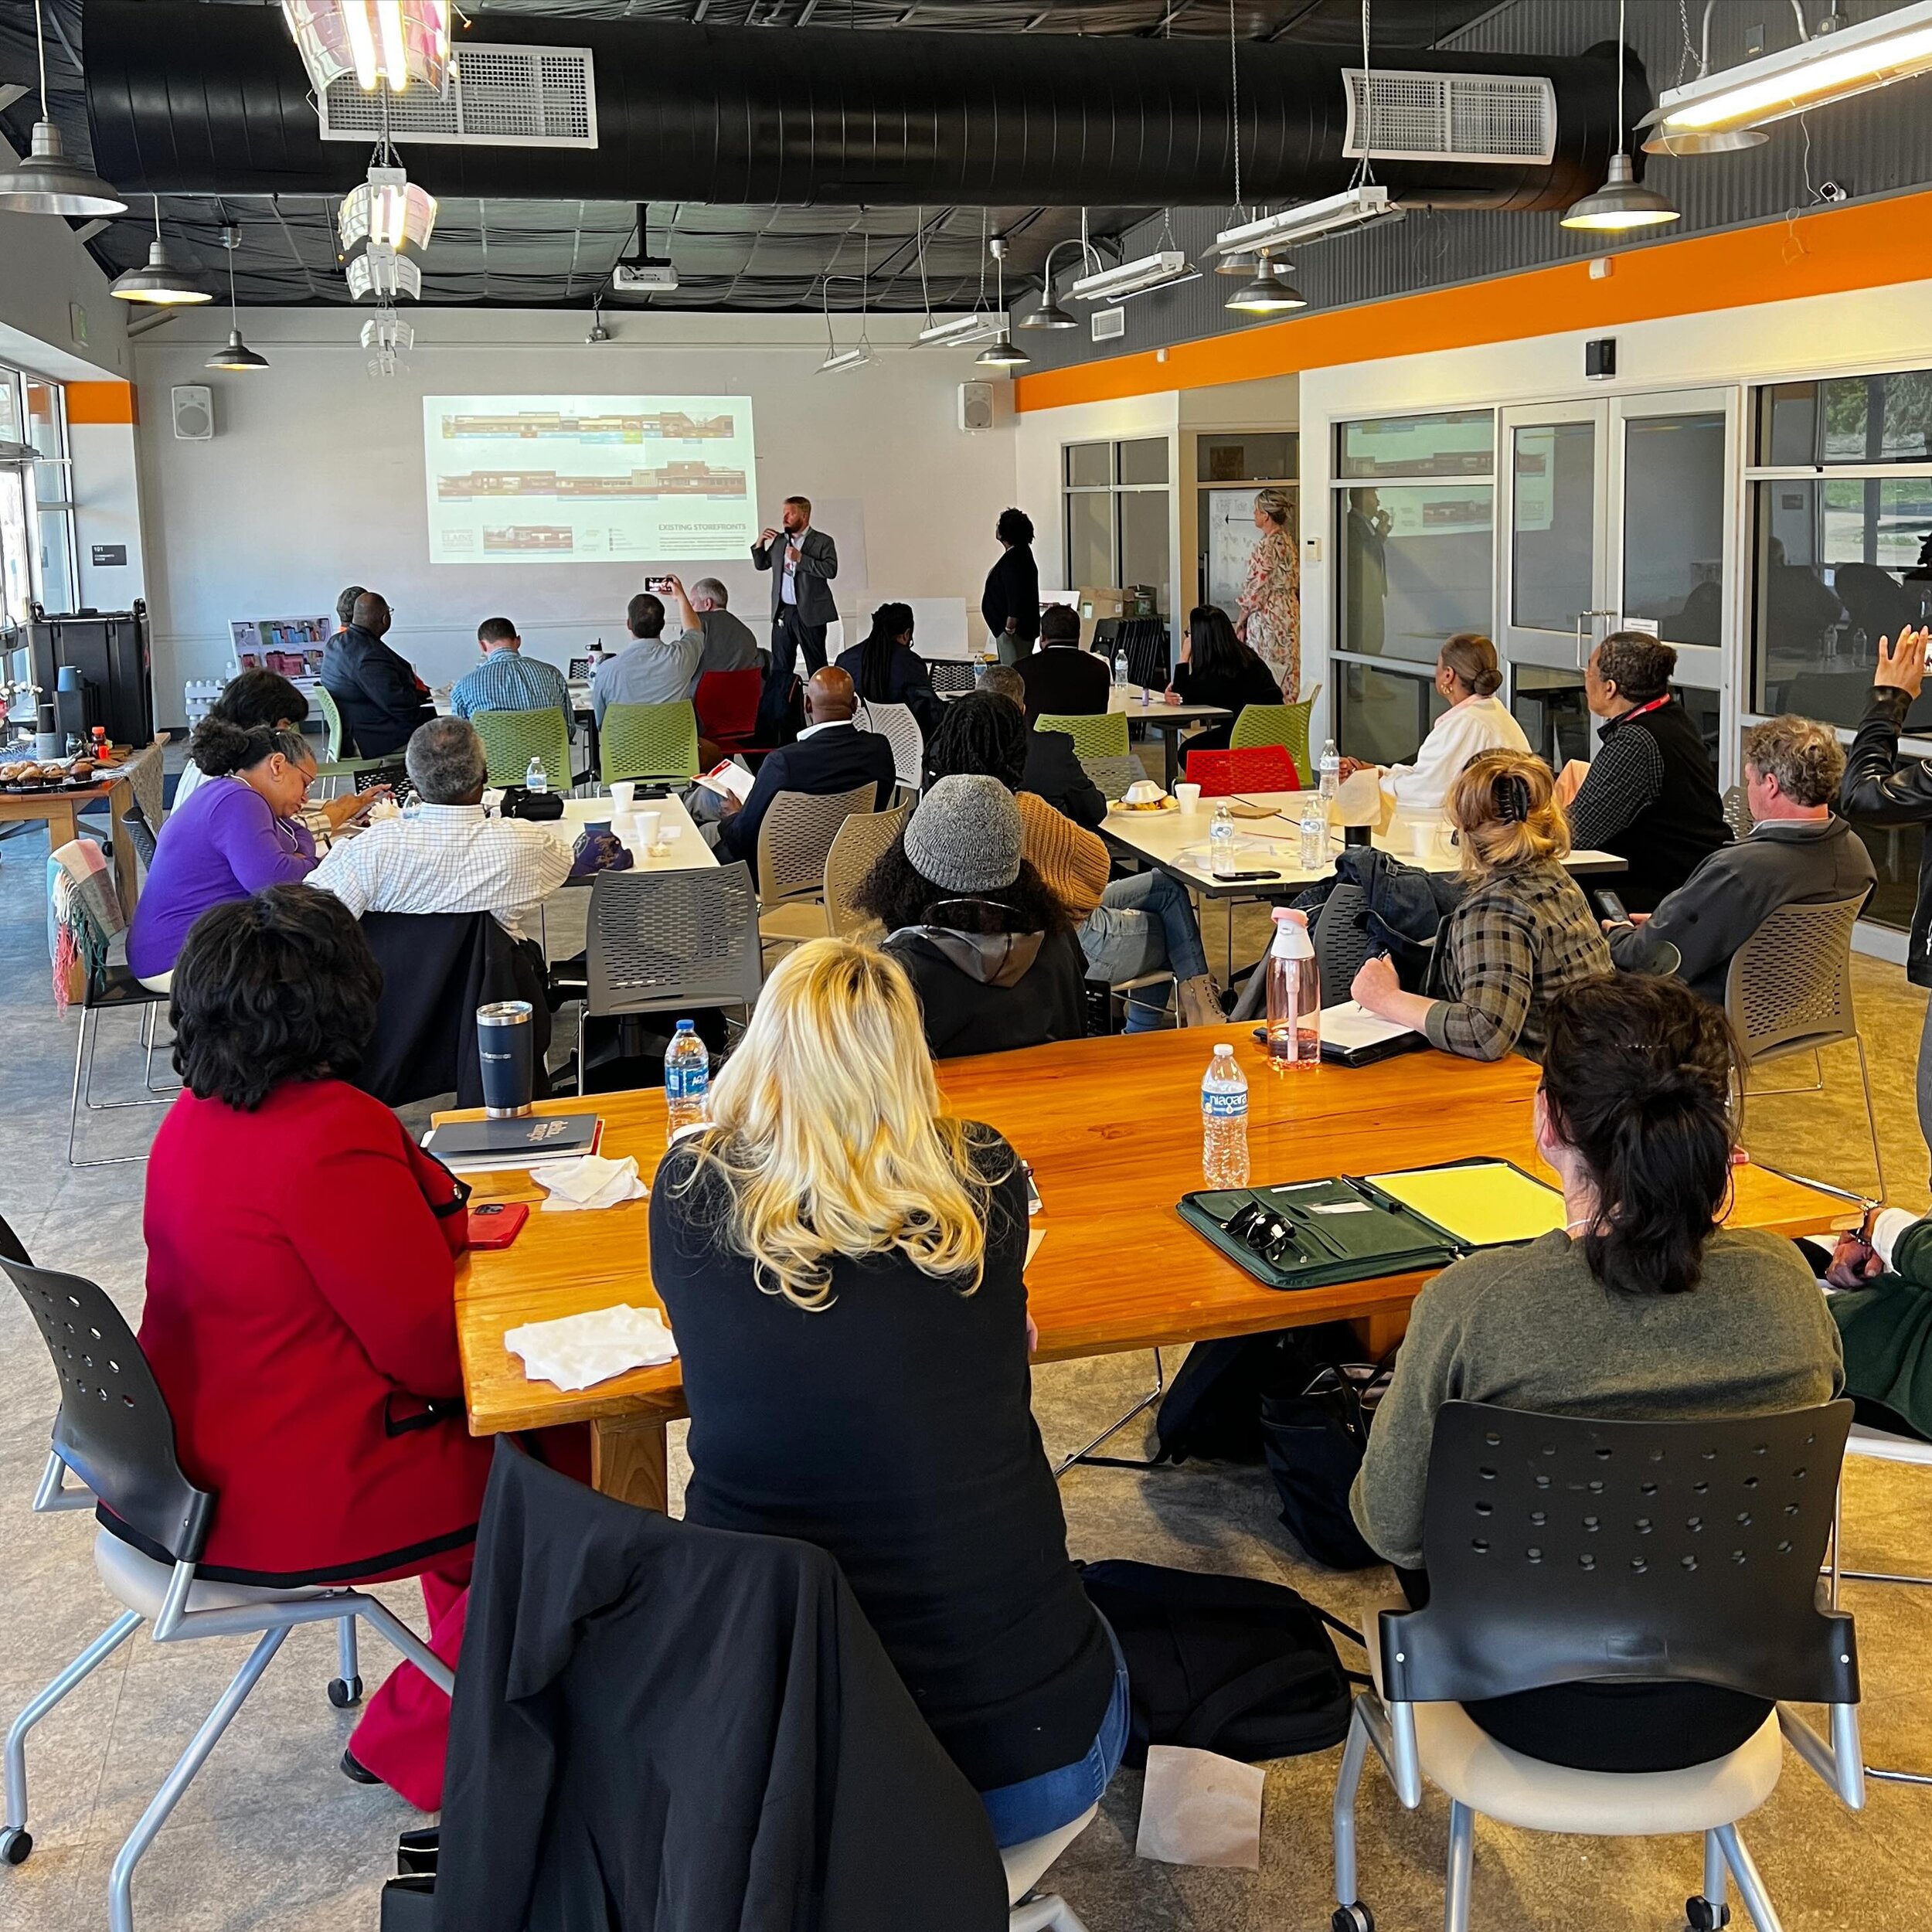 Today we hosted the @community.progress at the Hunt Center in Helena, AR along with representatives from Pine Bluff, Clarksdale, Elaine, and the Walton Family Foundation to share strategies and success for activating our vacant properties. We have so